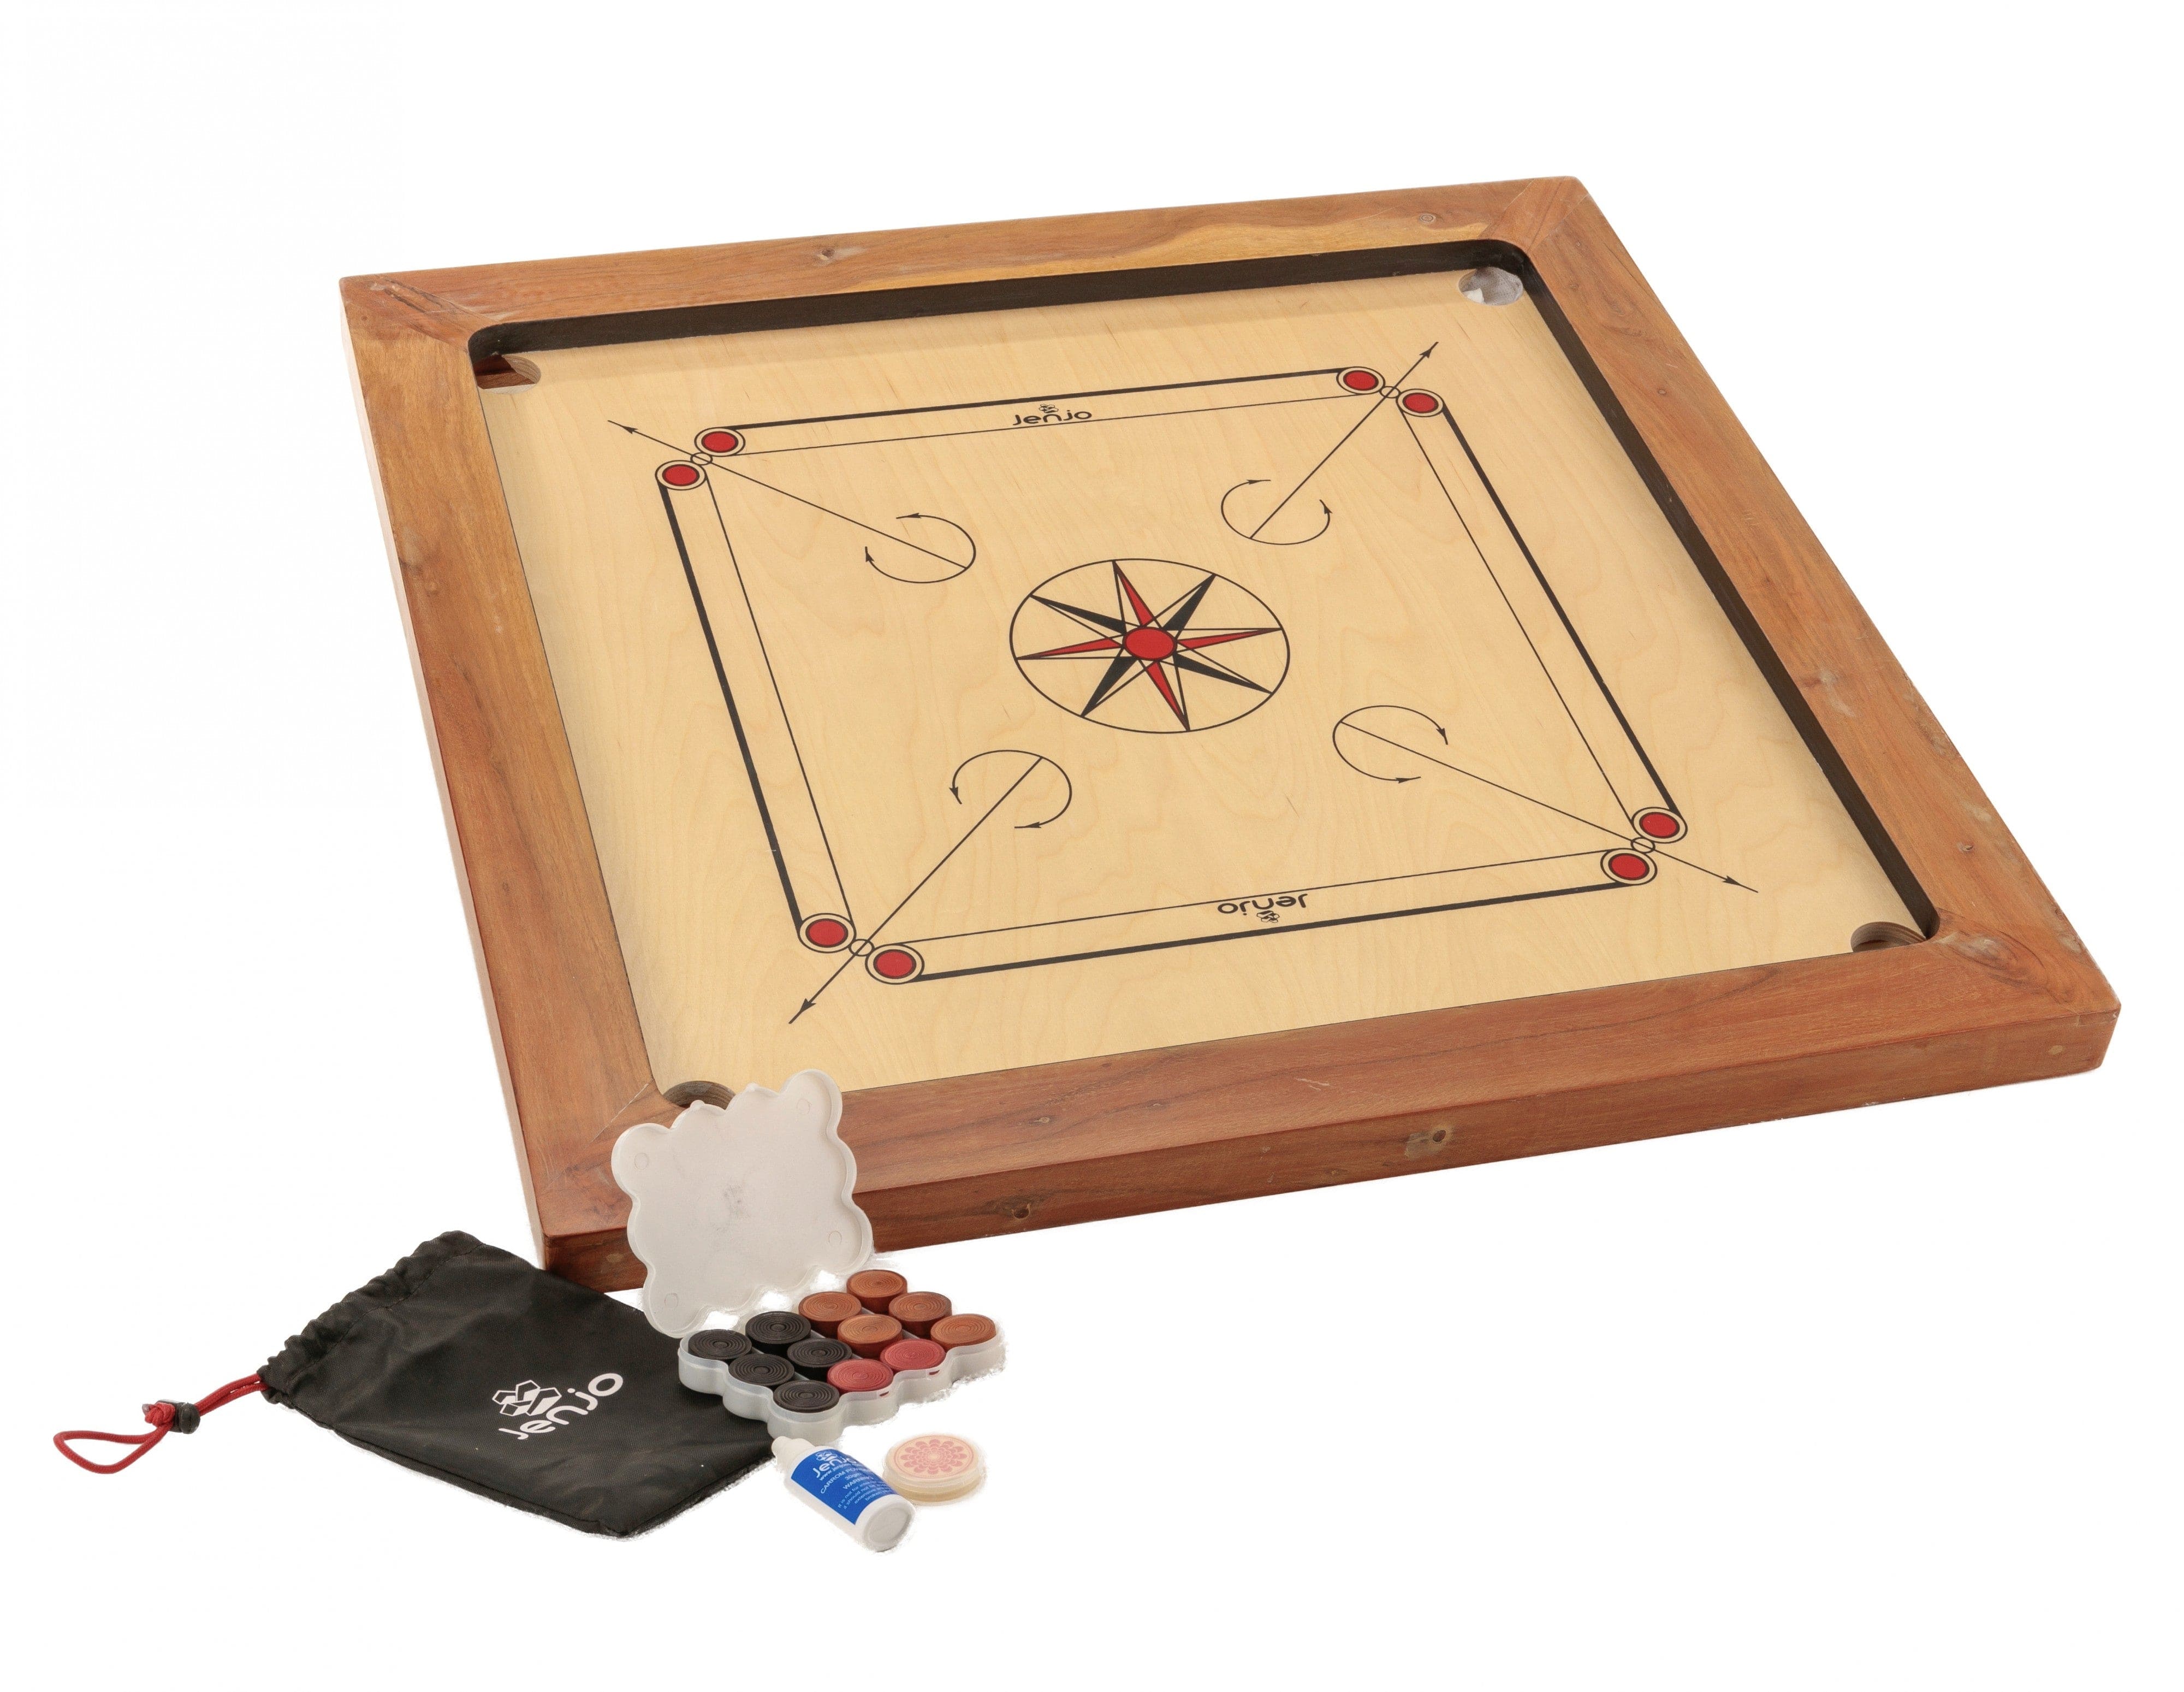 87x87cm Plywood Championship Carrom Board with 74x74cm Internal Playing Area